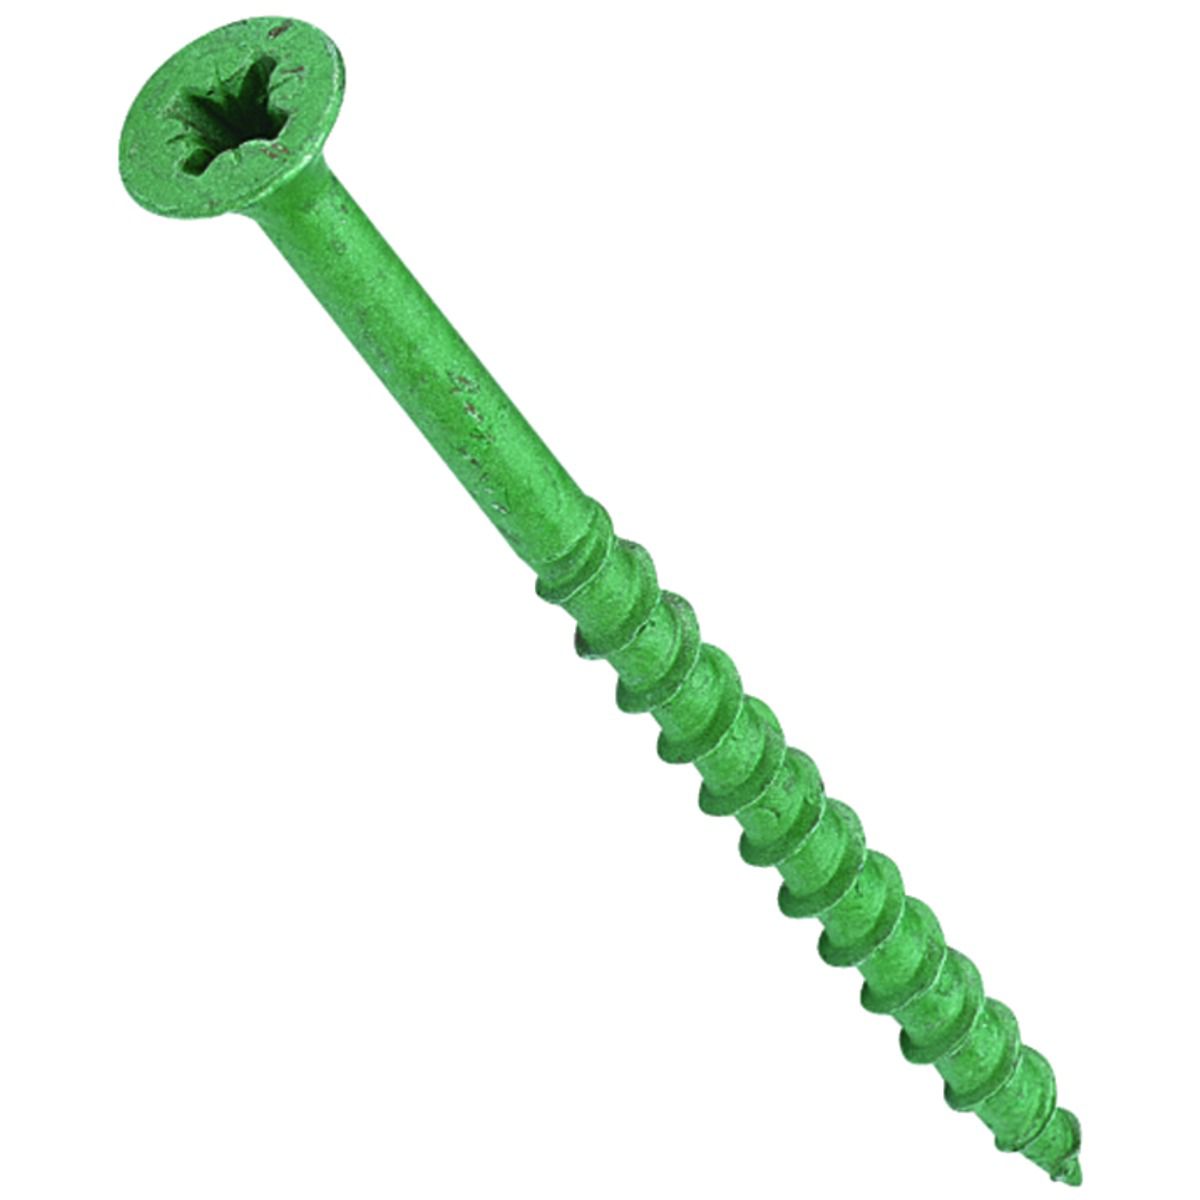 Image of Wickes External Grade Screw - Green No 10 x 38mm Pack of 20